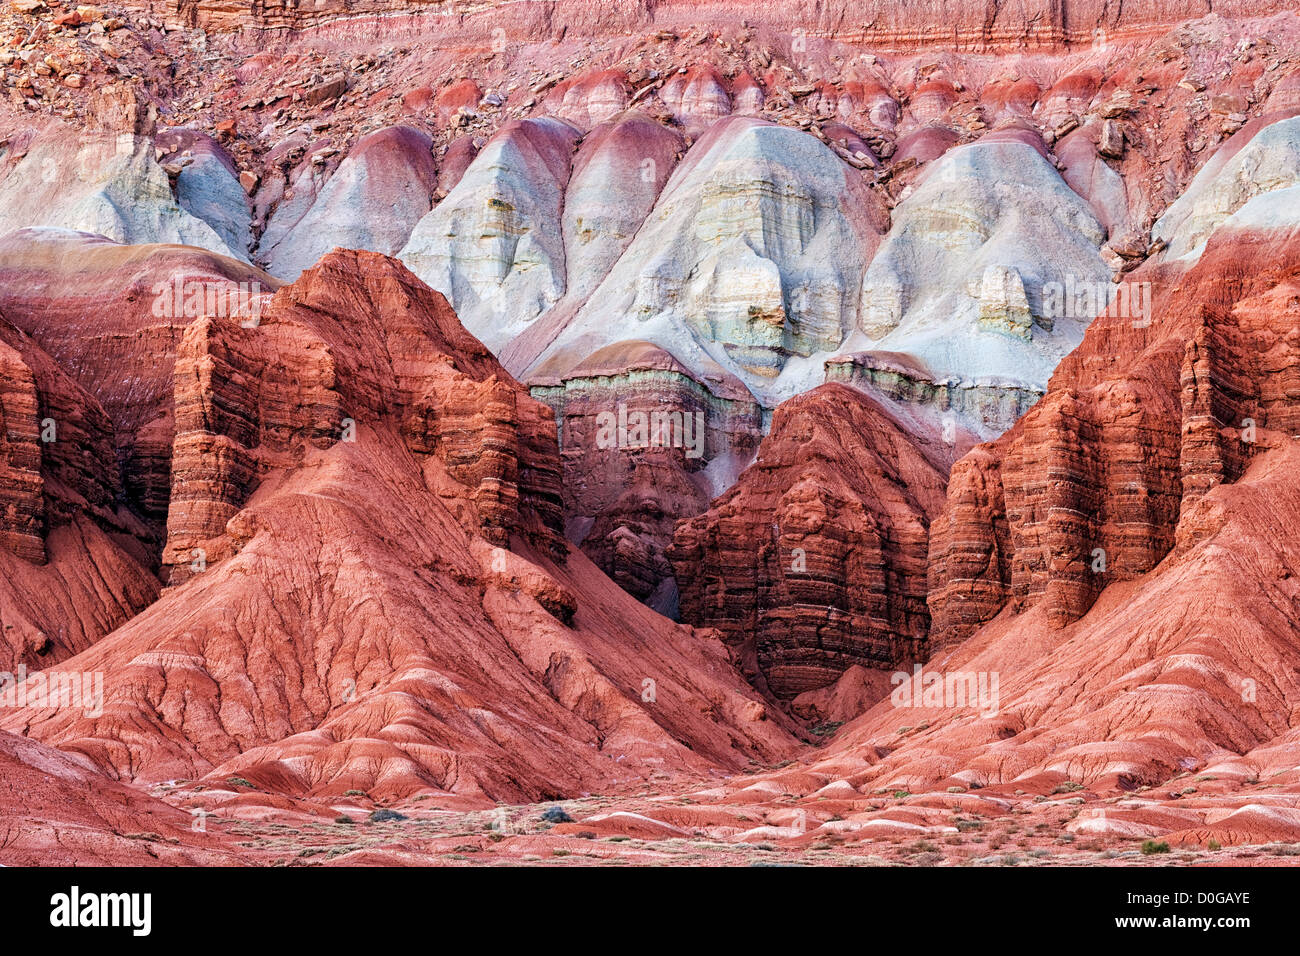 Multi-hued rock layers make up the sandstone walls of Utah’s Capitol Reef National Park. Stock Photo